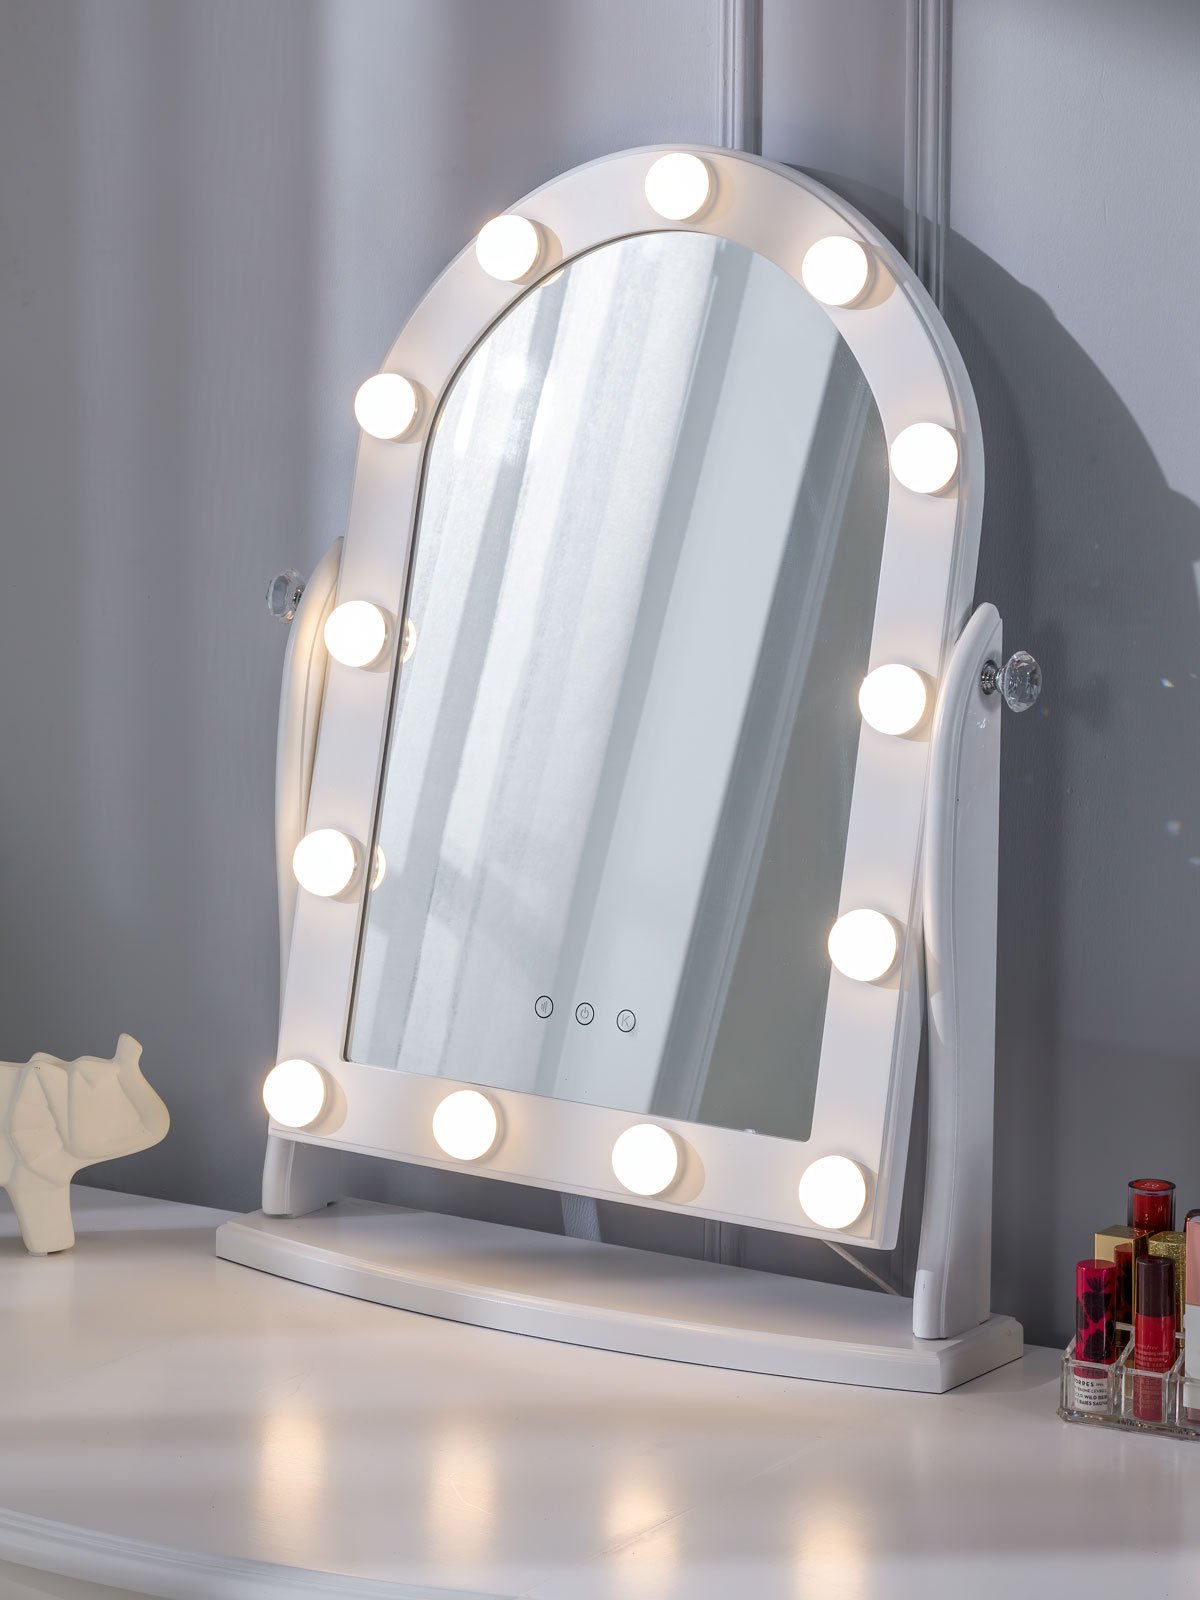 LUXFURNI Hollywood Lighted Vanity Makeup Mirror w/ 13 LED Lights, Touch Control